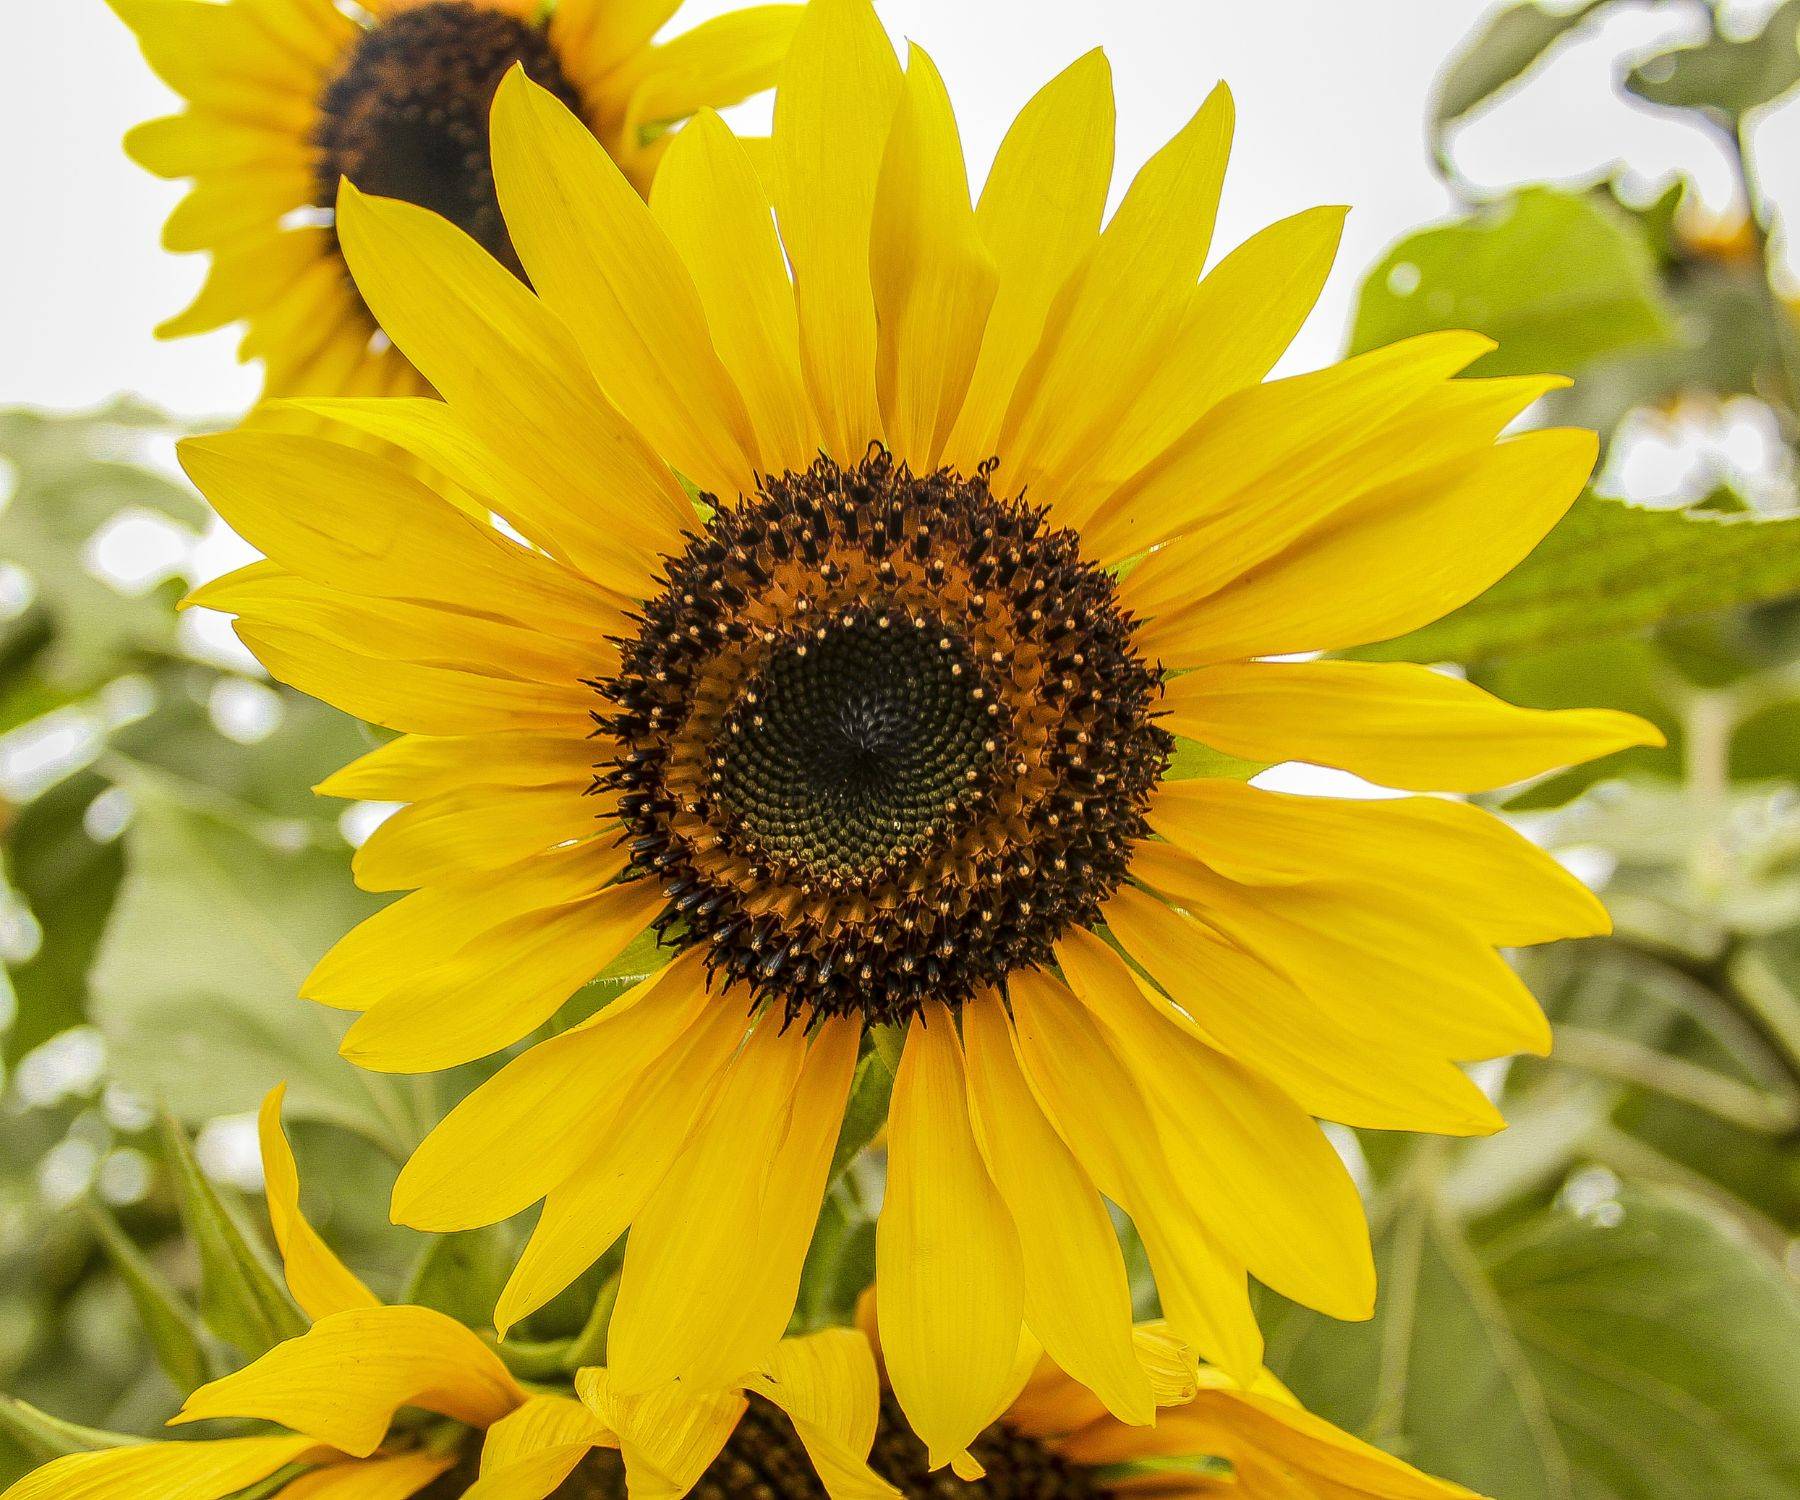 A photo of a large sunflower